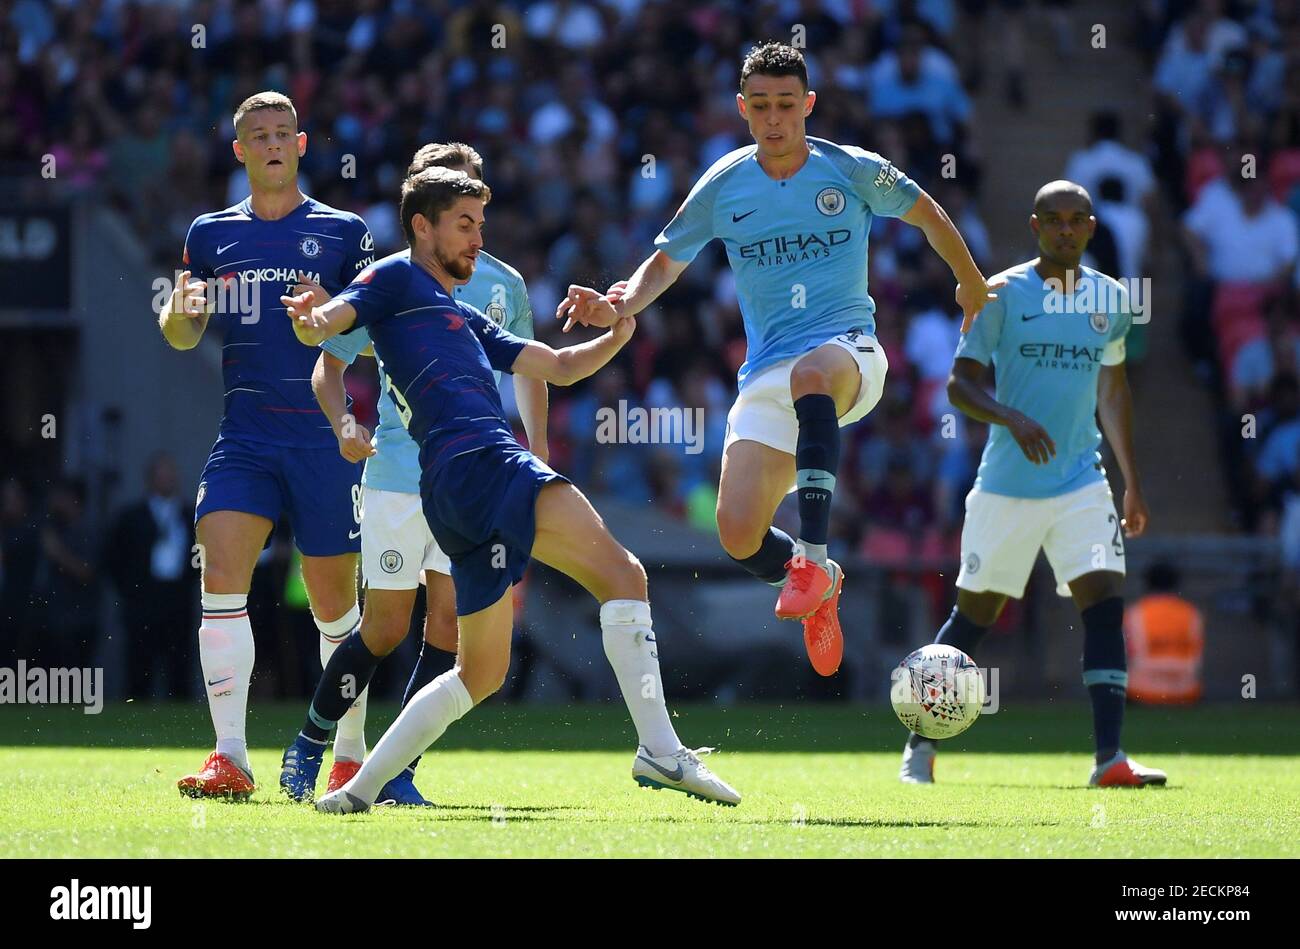 Soccer Football - FA Community Shield - Manchester City v Chelsea - Wembley Stadium, London, Britain - August 5, 2018  Manchester CityÕs Phil Foden in action with ChelseaÕs Jorginho   REUTERS/Toby Melville Stock Photo